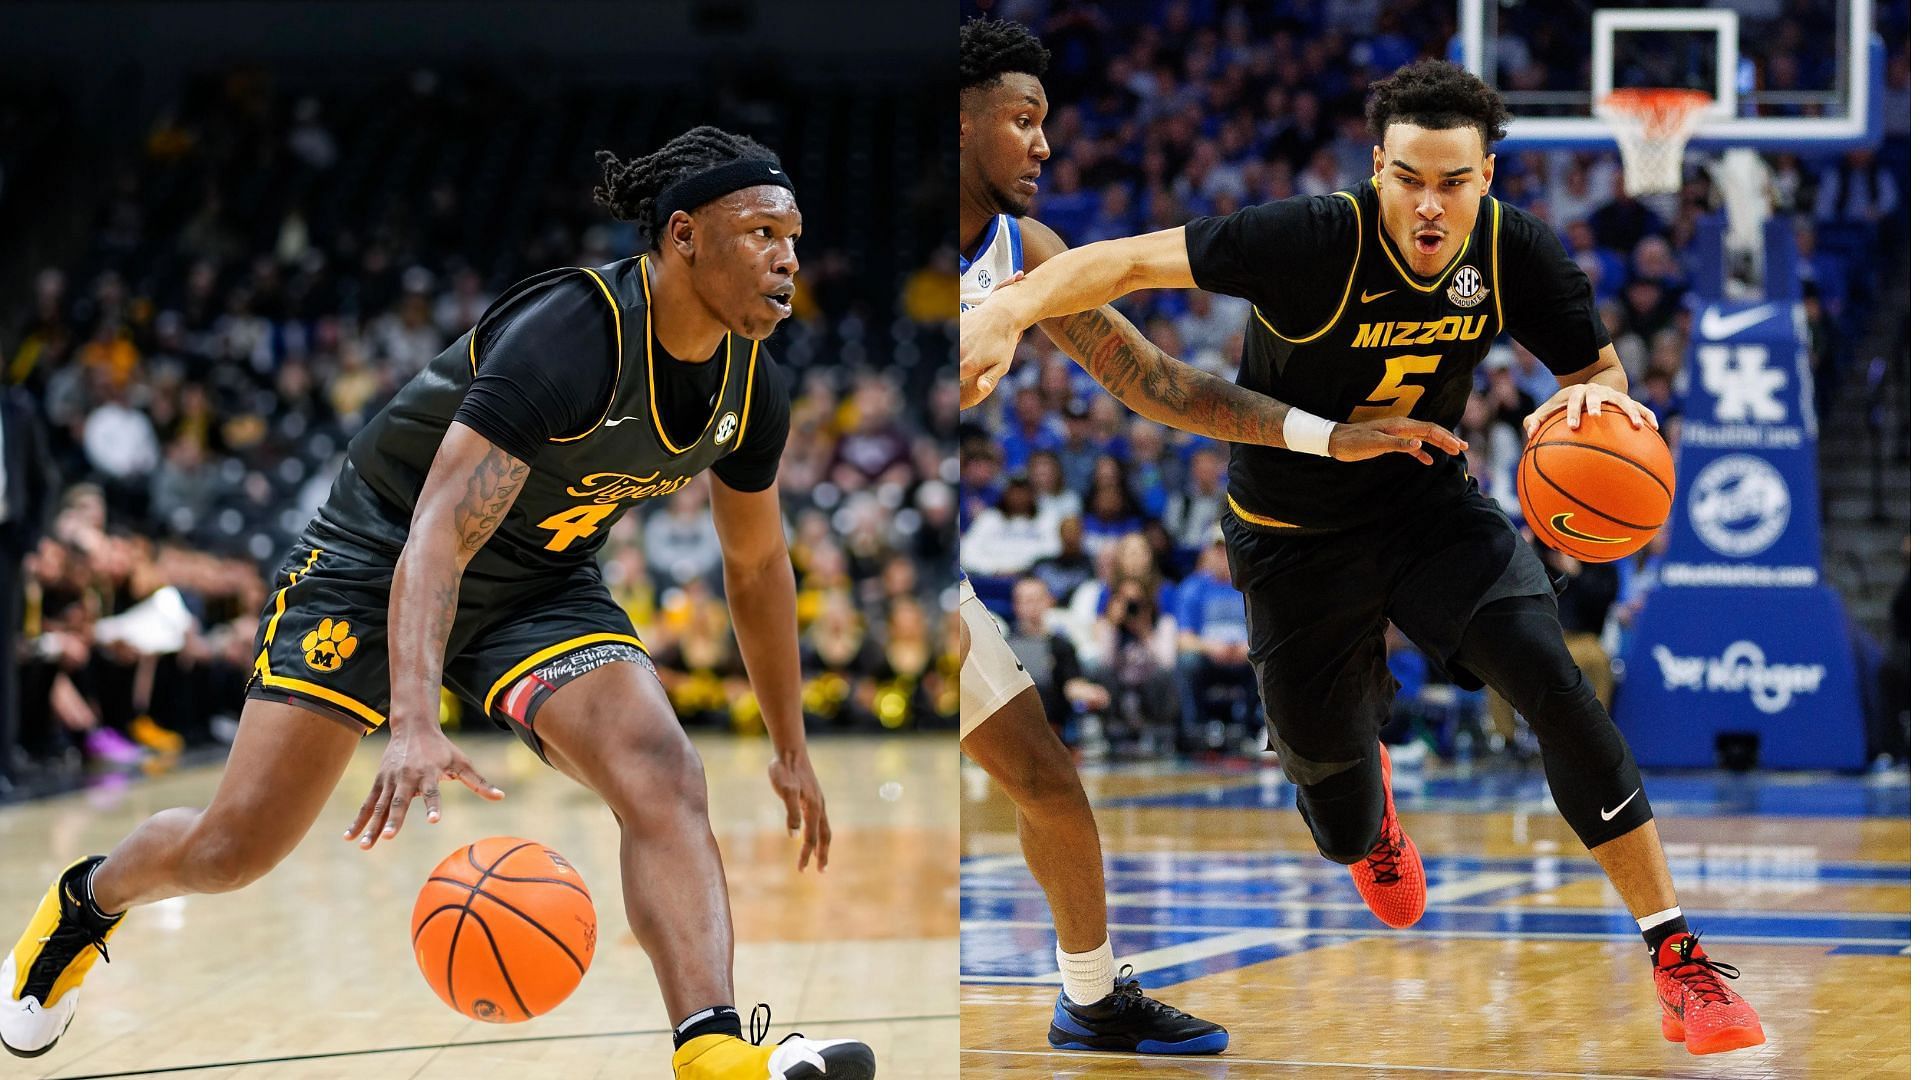 Curt Lewis and John Tonje have both entered the transfer portal from Missouri